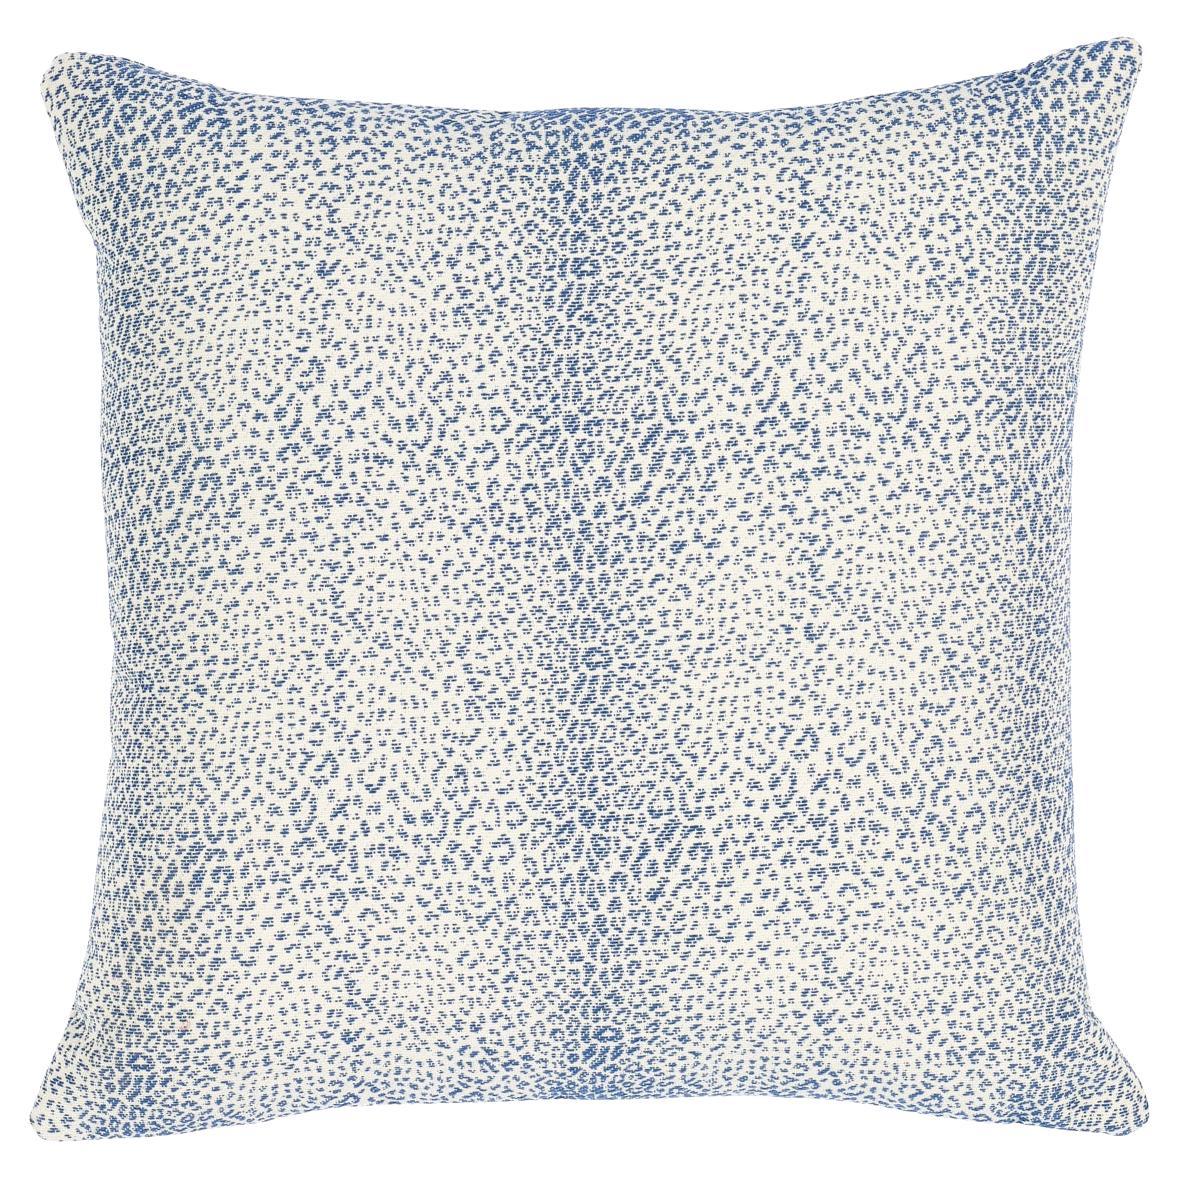 Schumacher Mini Leopard I/O  in Navy 18" Pillow For Sale